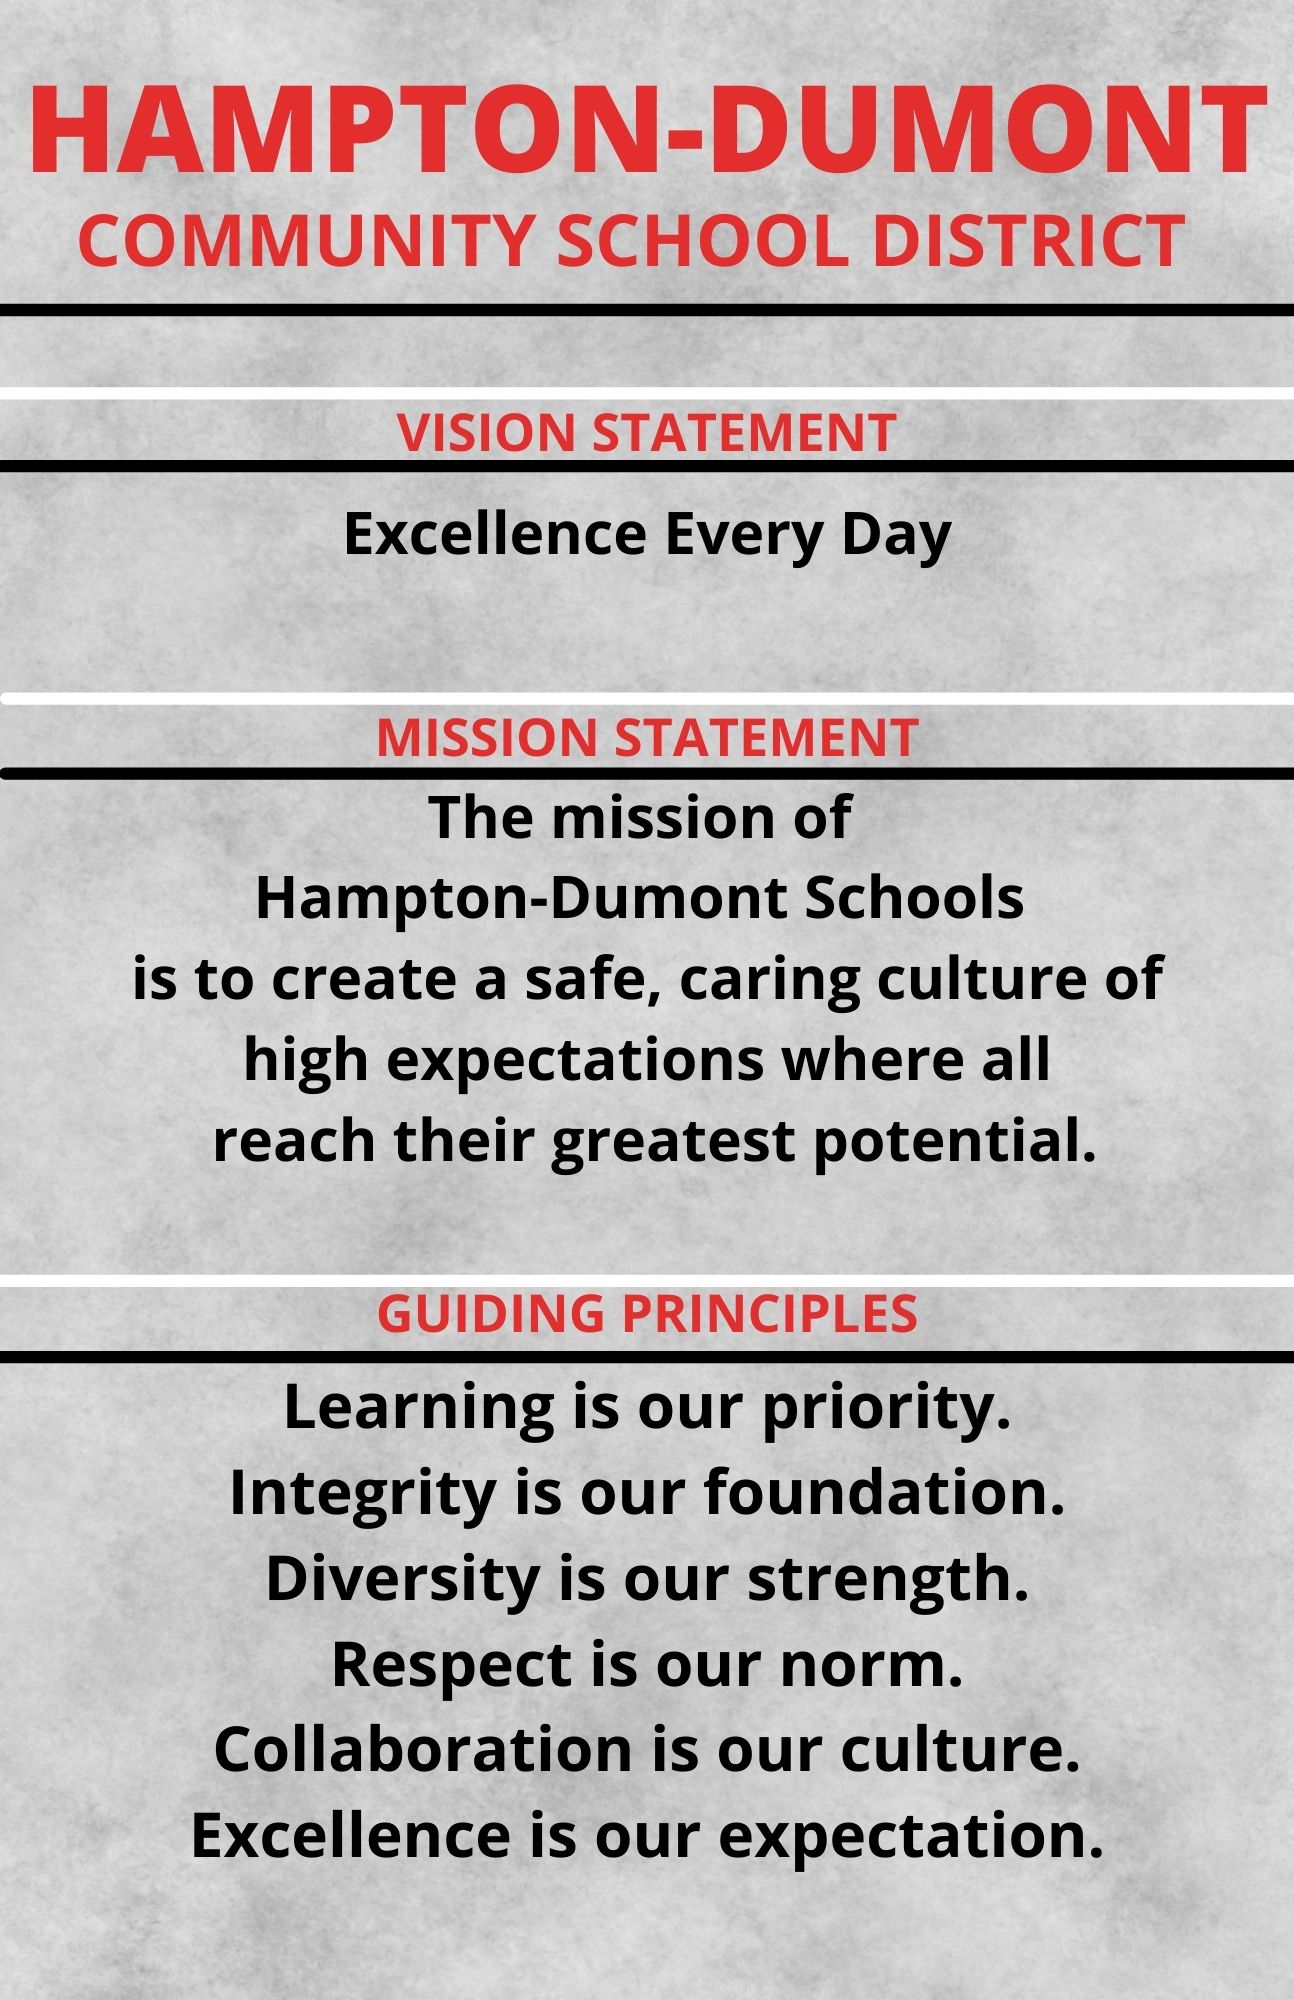 Picture of Hampton-Dumont's Vision Statement, Mission Statement and Guiding Principles